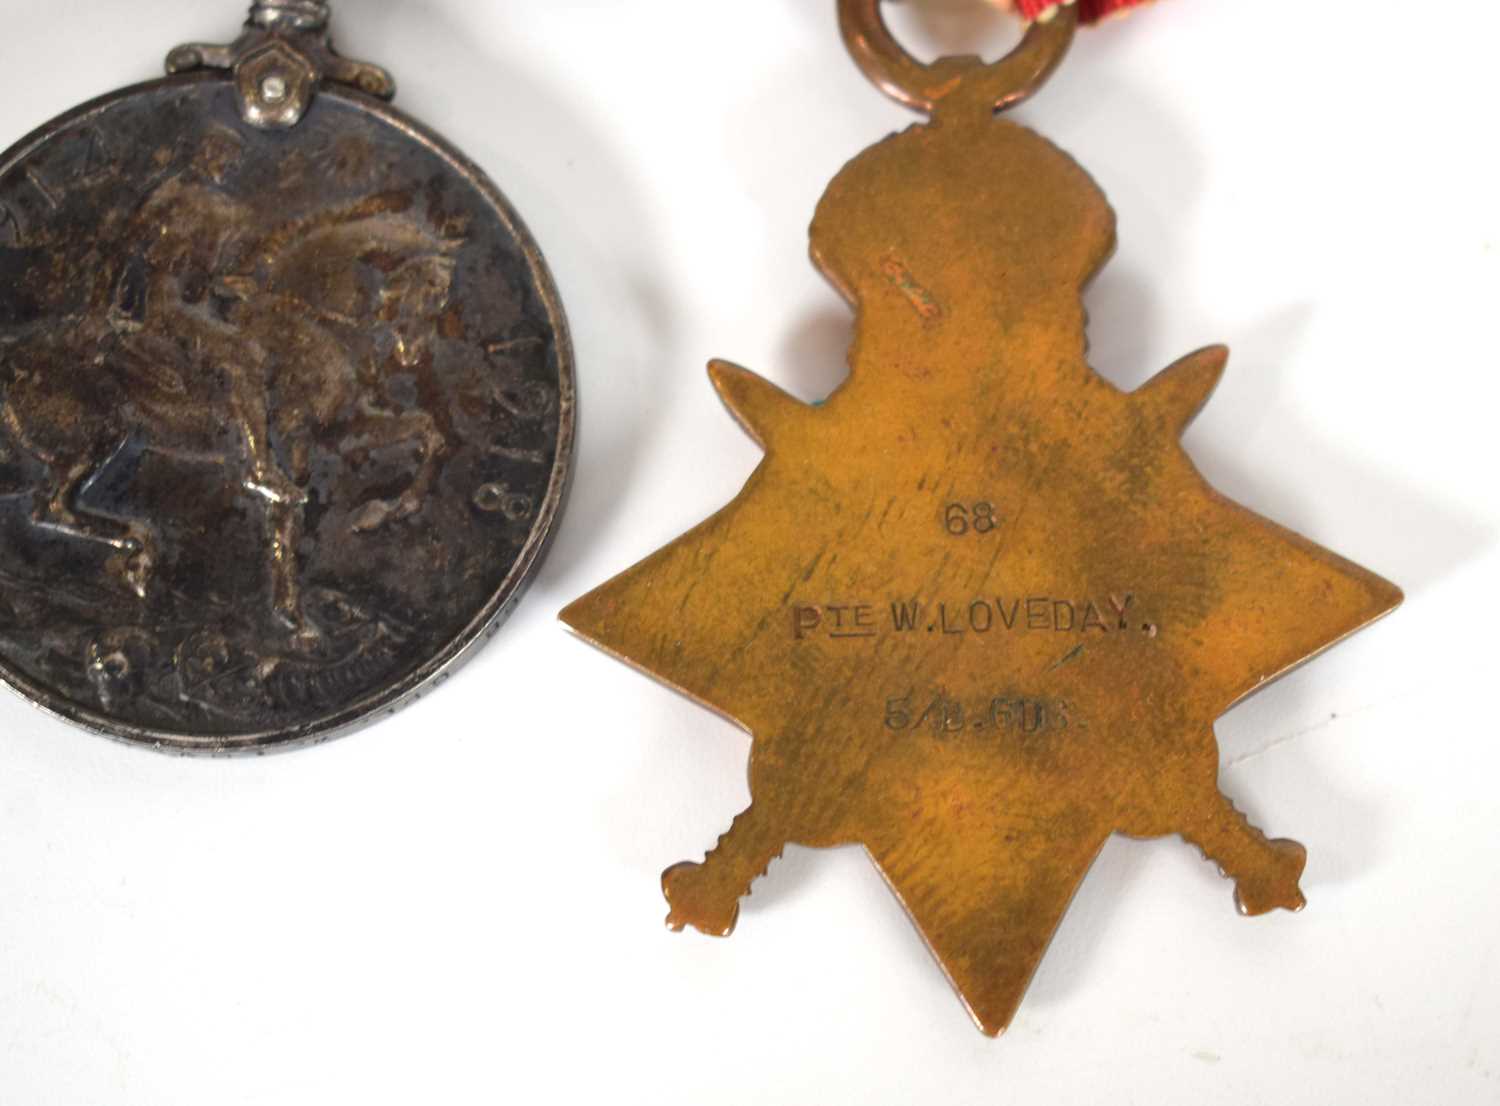 A trio of First World War medals including a 1914 Volunteer Star awarded to 68 Private/Corporal W. - Image 3 of 5